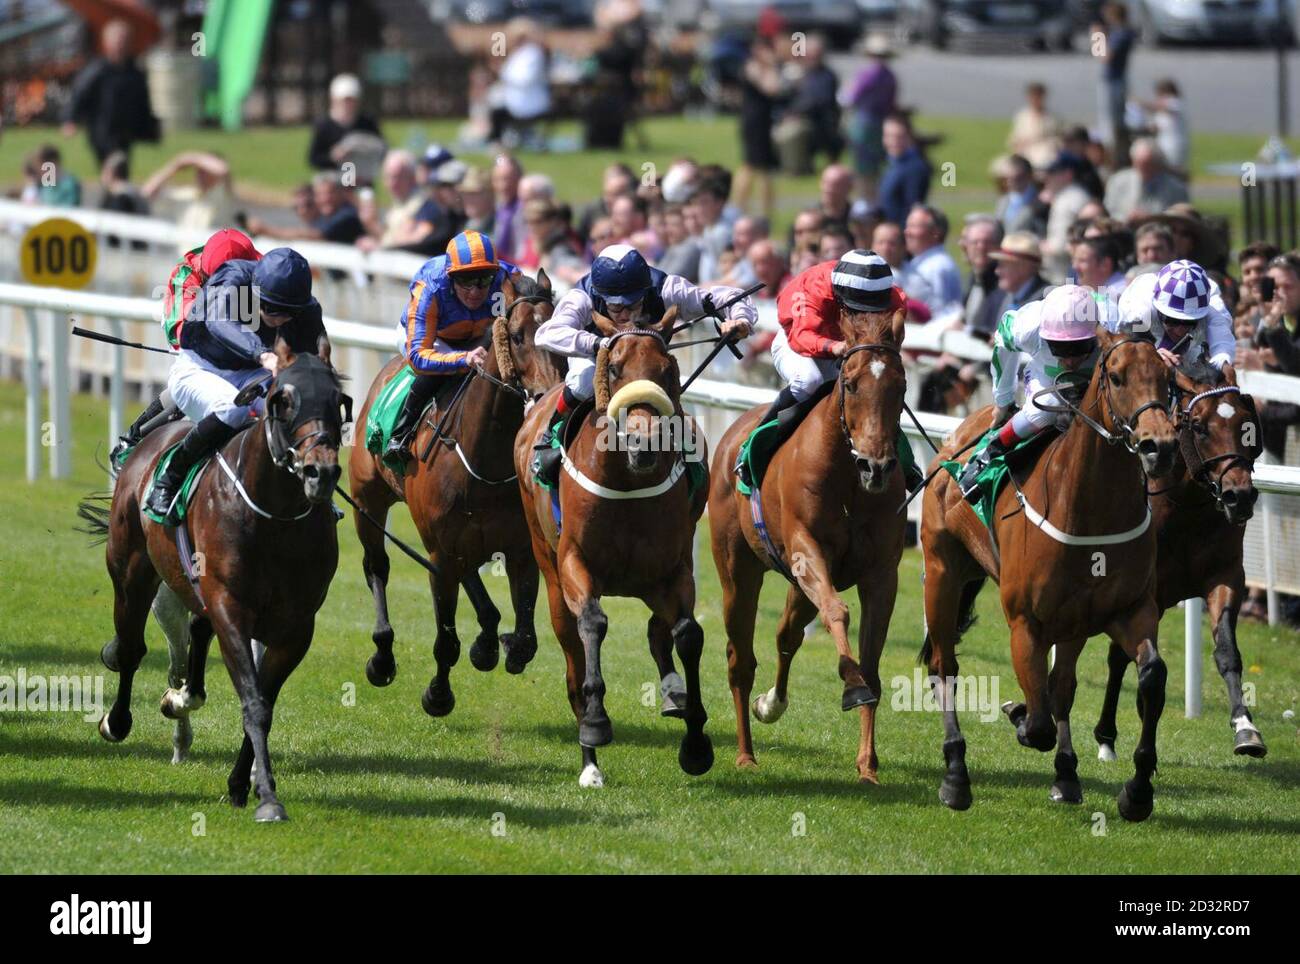 Hitchens ridden by Johnny Murtagh (second right) wins the Weatherbys Ireland Greenland Stakes during the Tattersalls Irish 2000 Guineas Day at Curragh Racecourse, County Kildare. Stock Photo